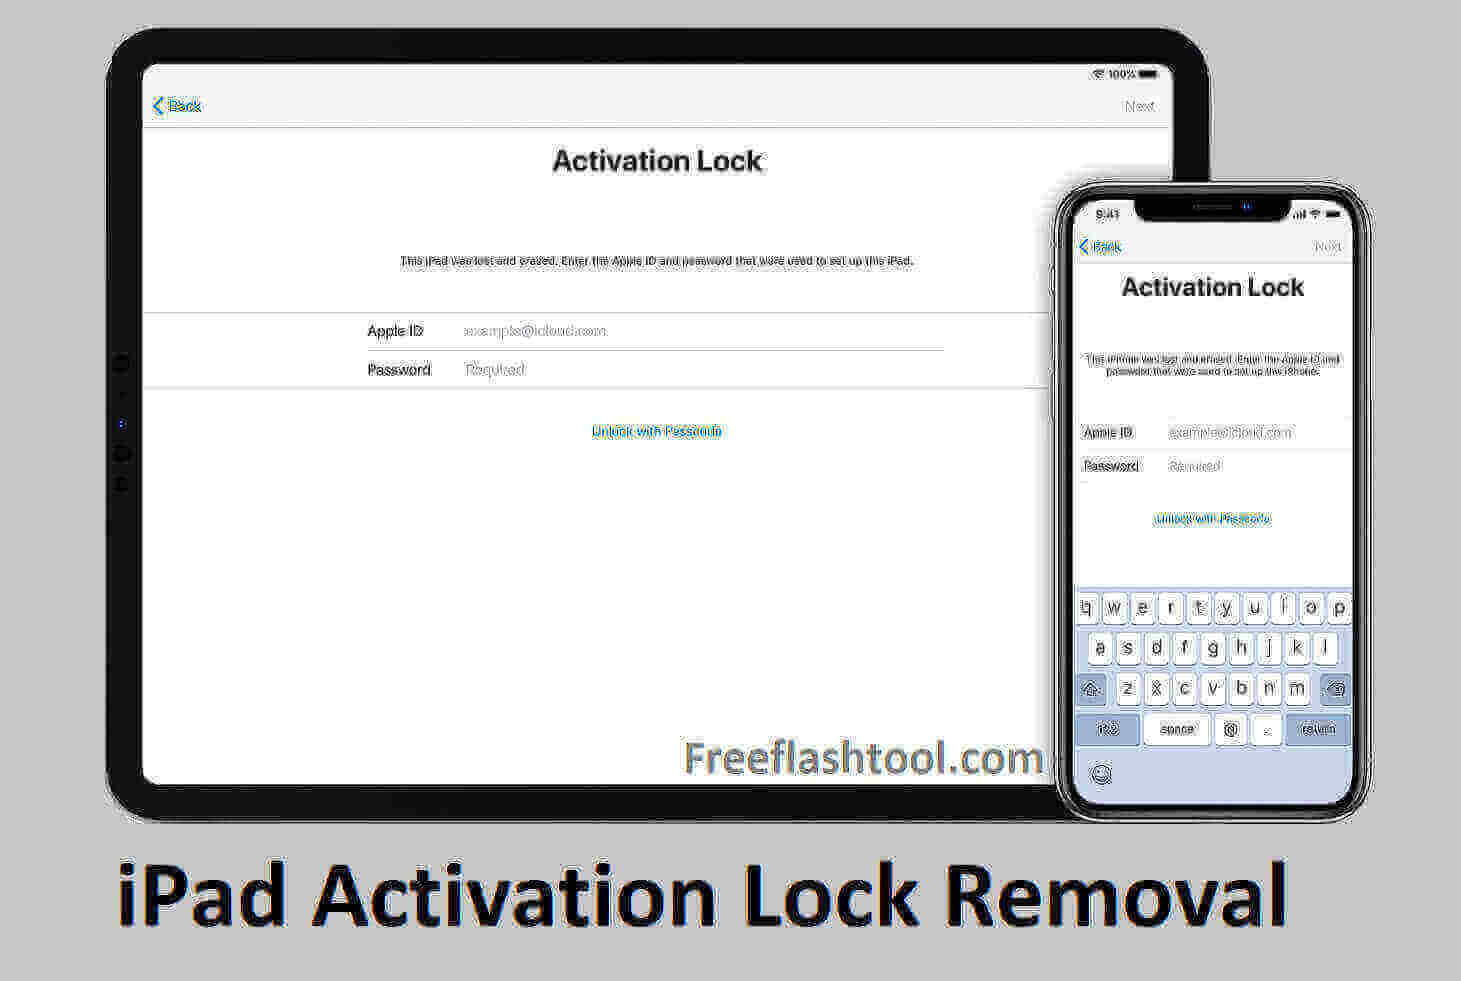 tenorshare activation lock removal